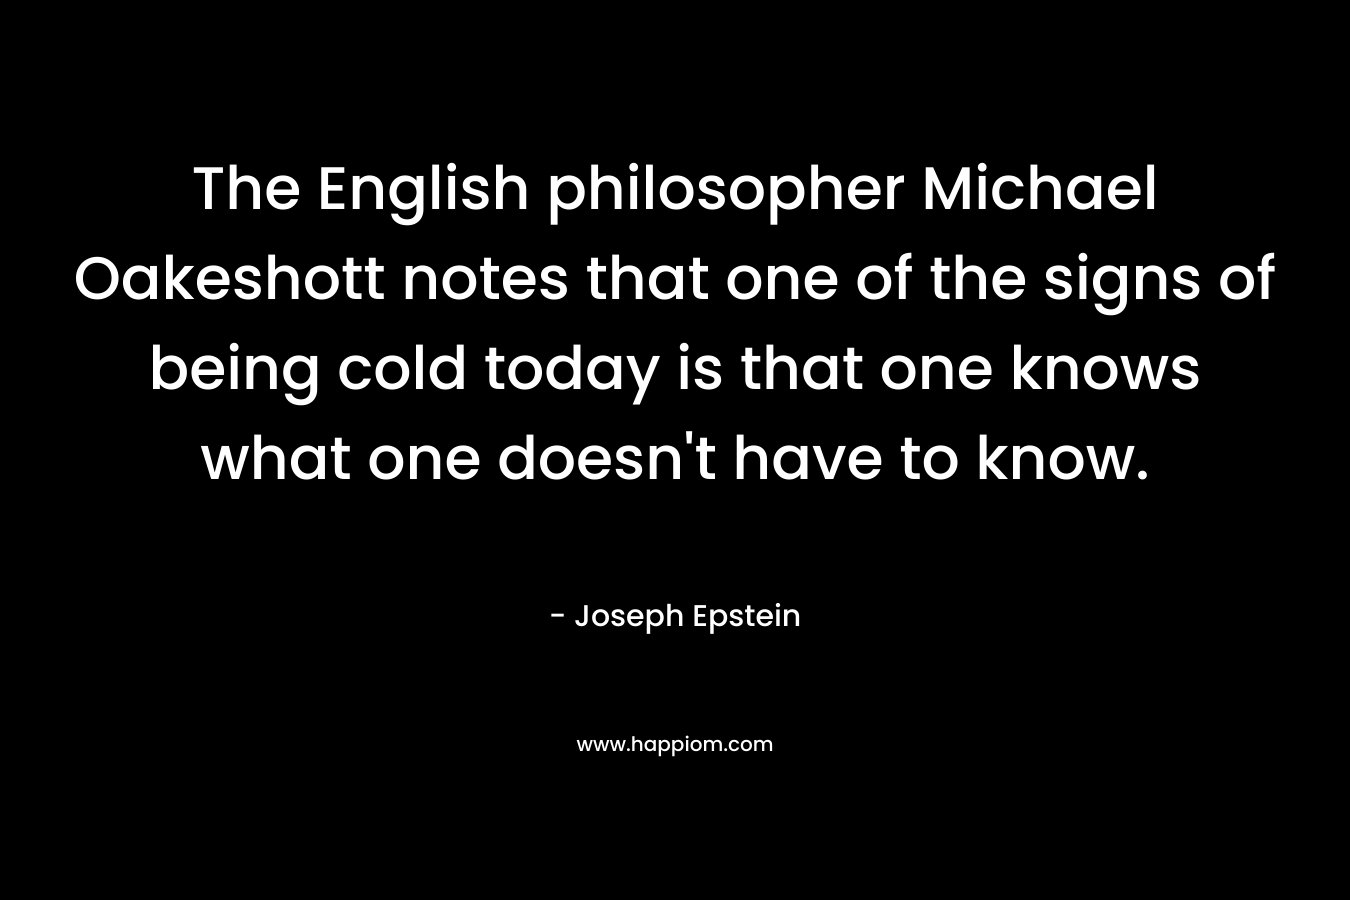 The English philosopher Michael Oakeshott notes that one of the signs of being cold today is that one knows what one doesn’t have to know. – Joseph Epstein